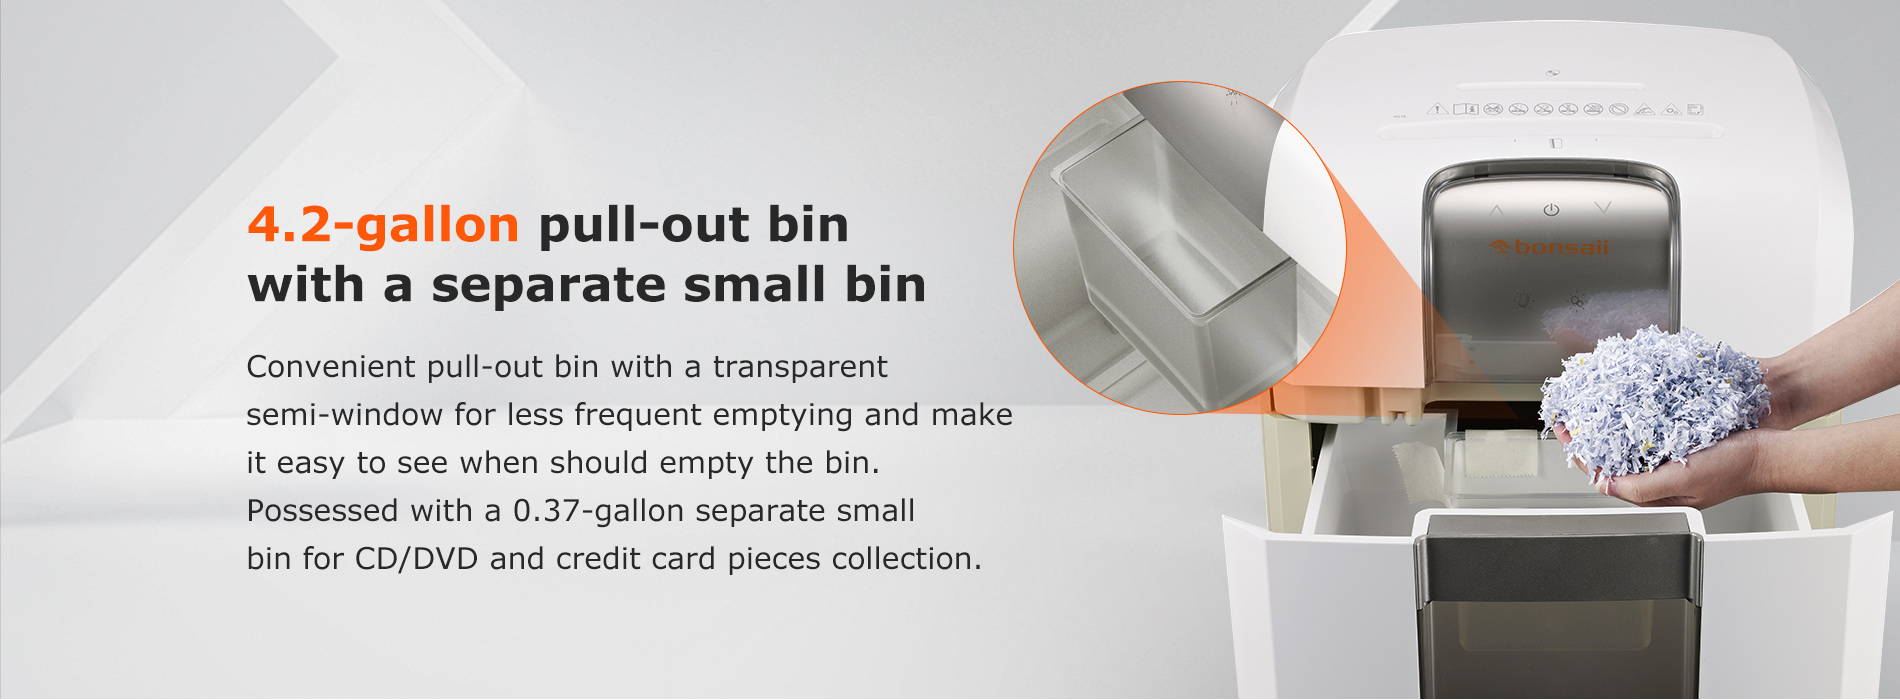 4.2-gallon pull-out bin with a separate small bin  Convenient pull-out bin with a transparent semi-window for less frequent emptying and make it easy to see when should empty the bin. Possessed with a 0.37-gallon separate small bin for CD/DVD and credit card pieces collection.